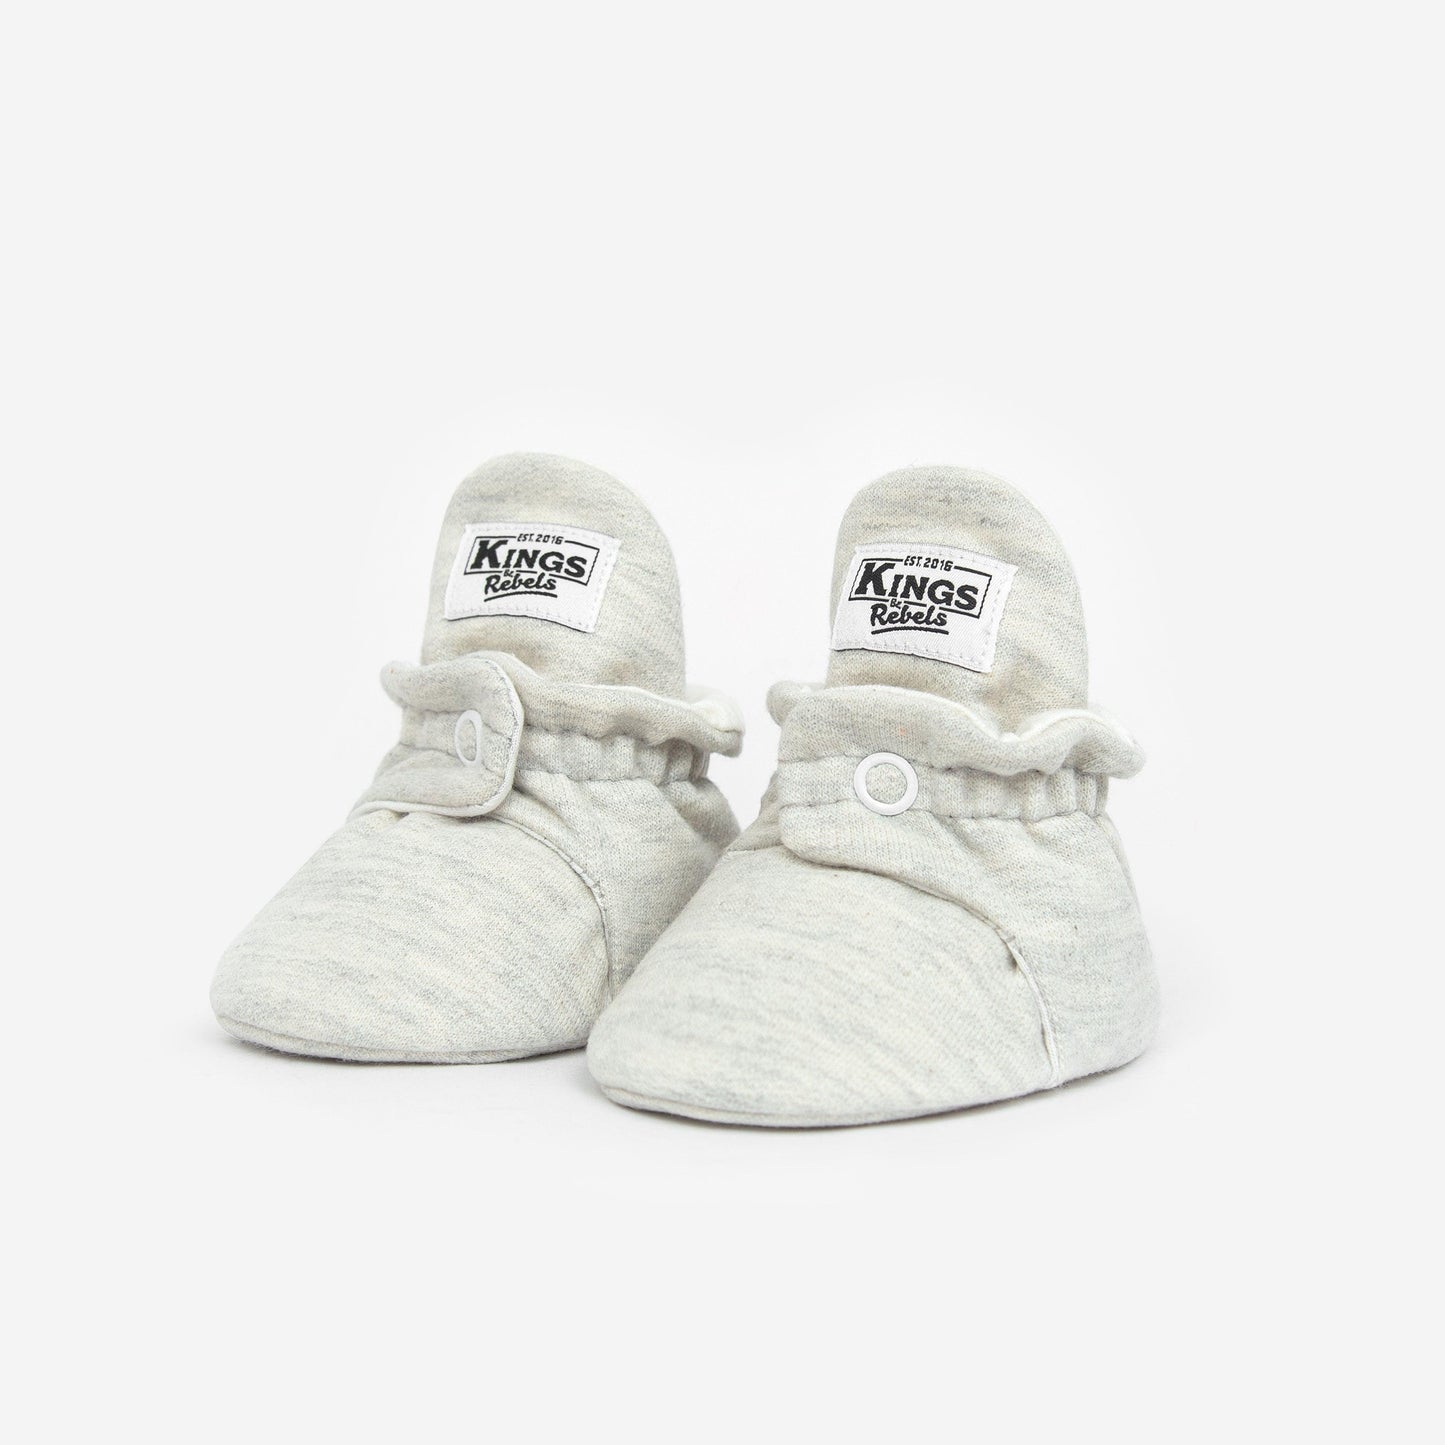 Cotton Booties 'Classic'- Lightgrey - The Little One • Family.Concept.Store. 